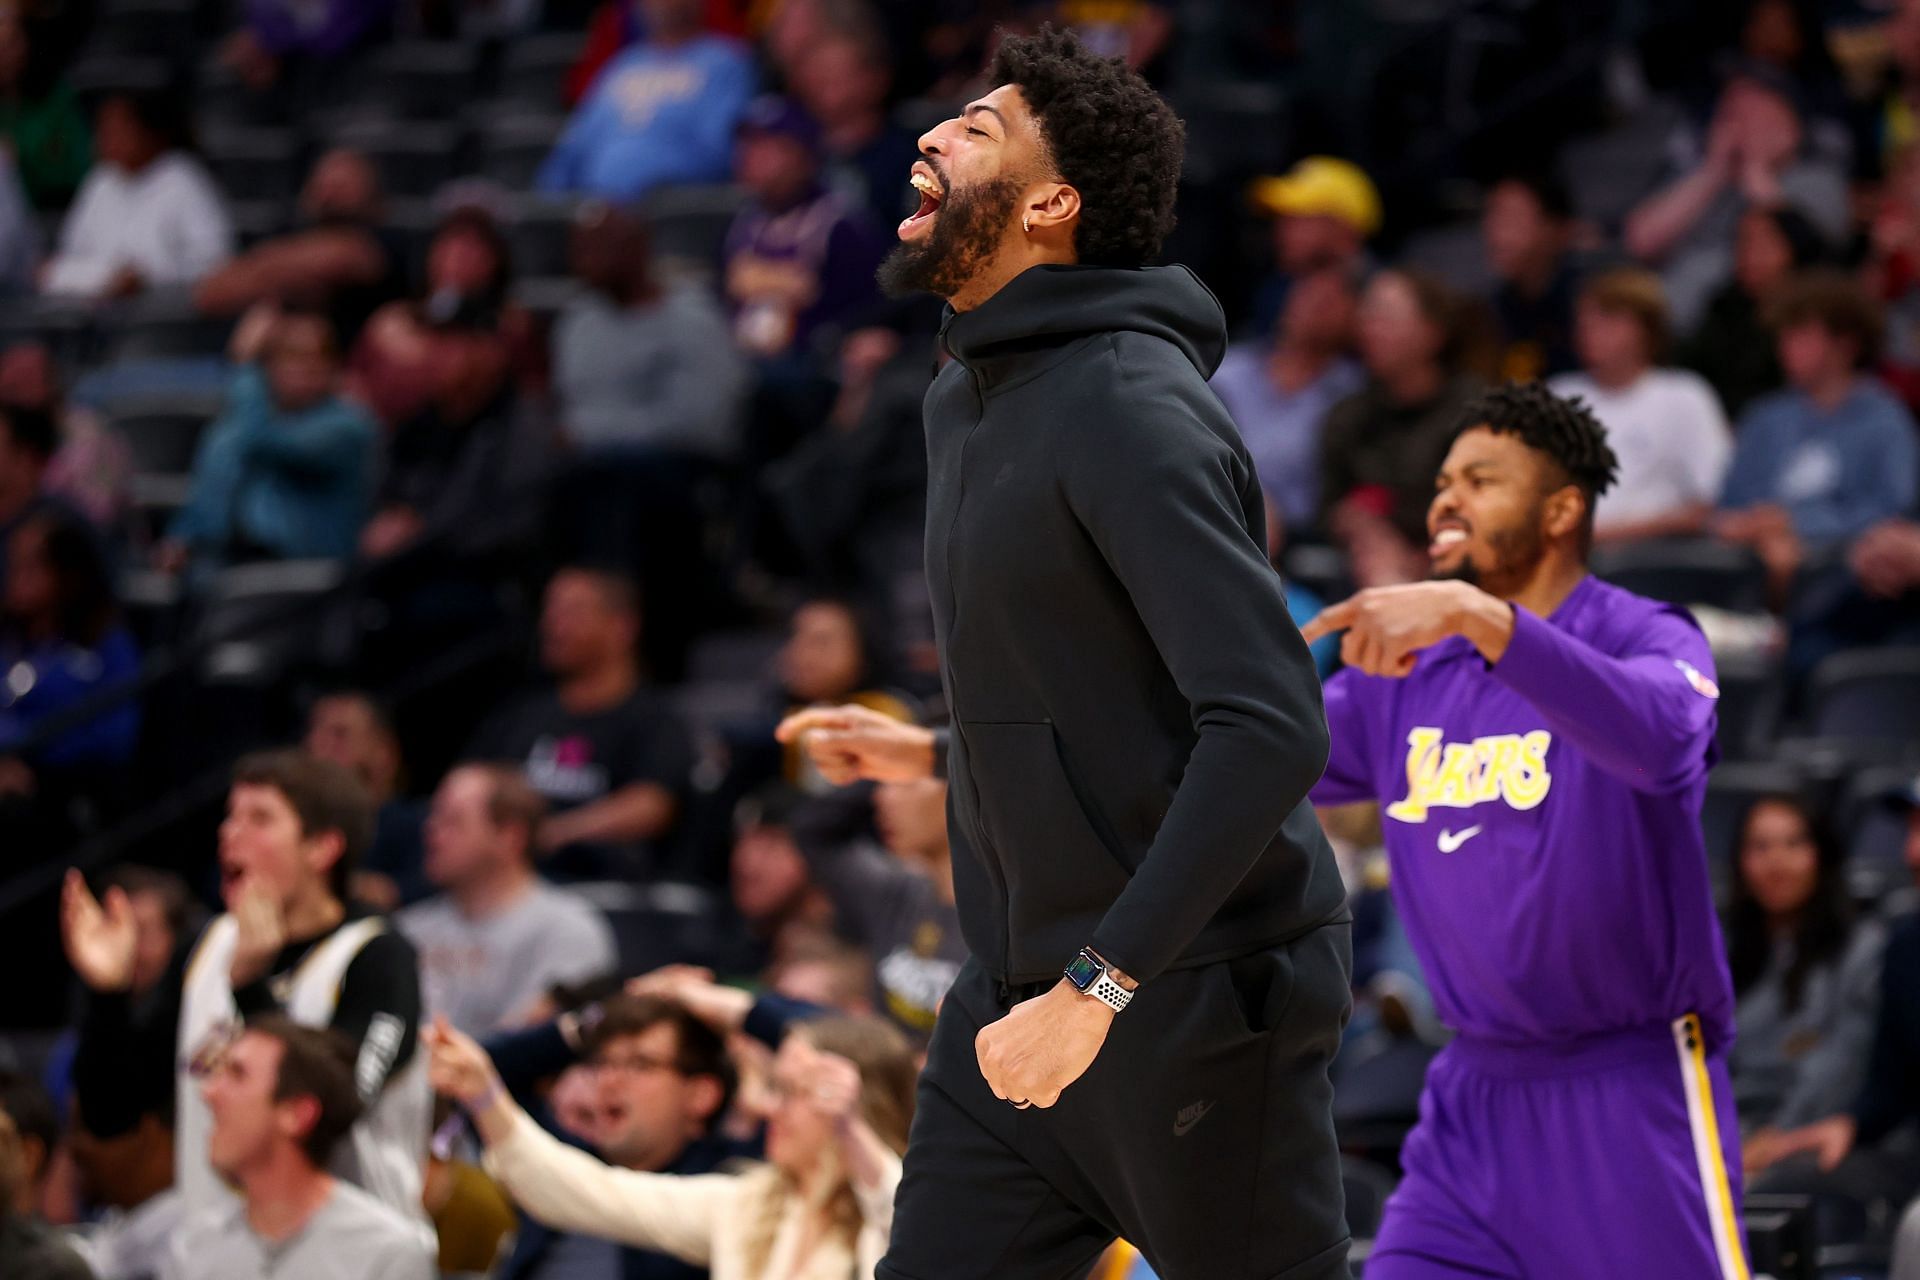 Anthony Davis celebrates a play from the bench